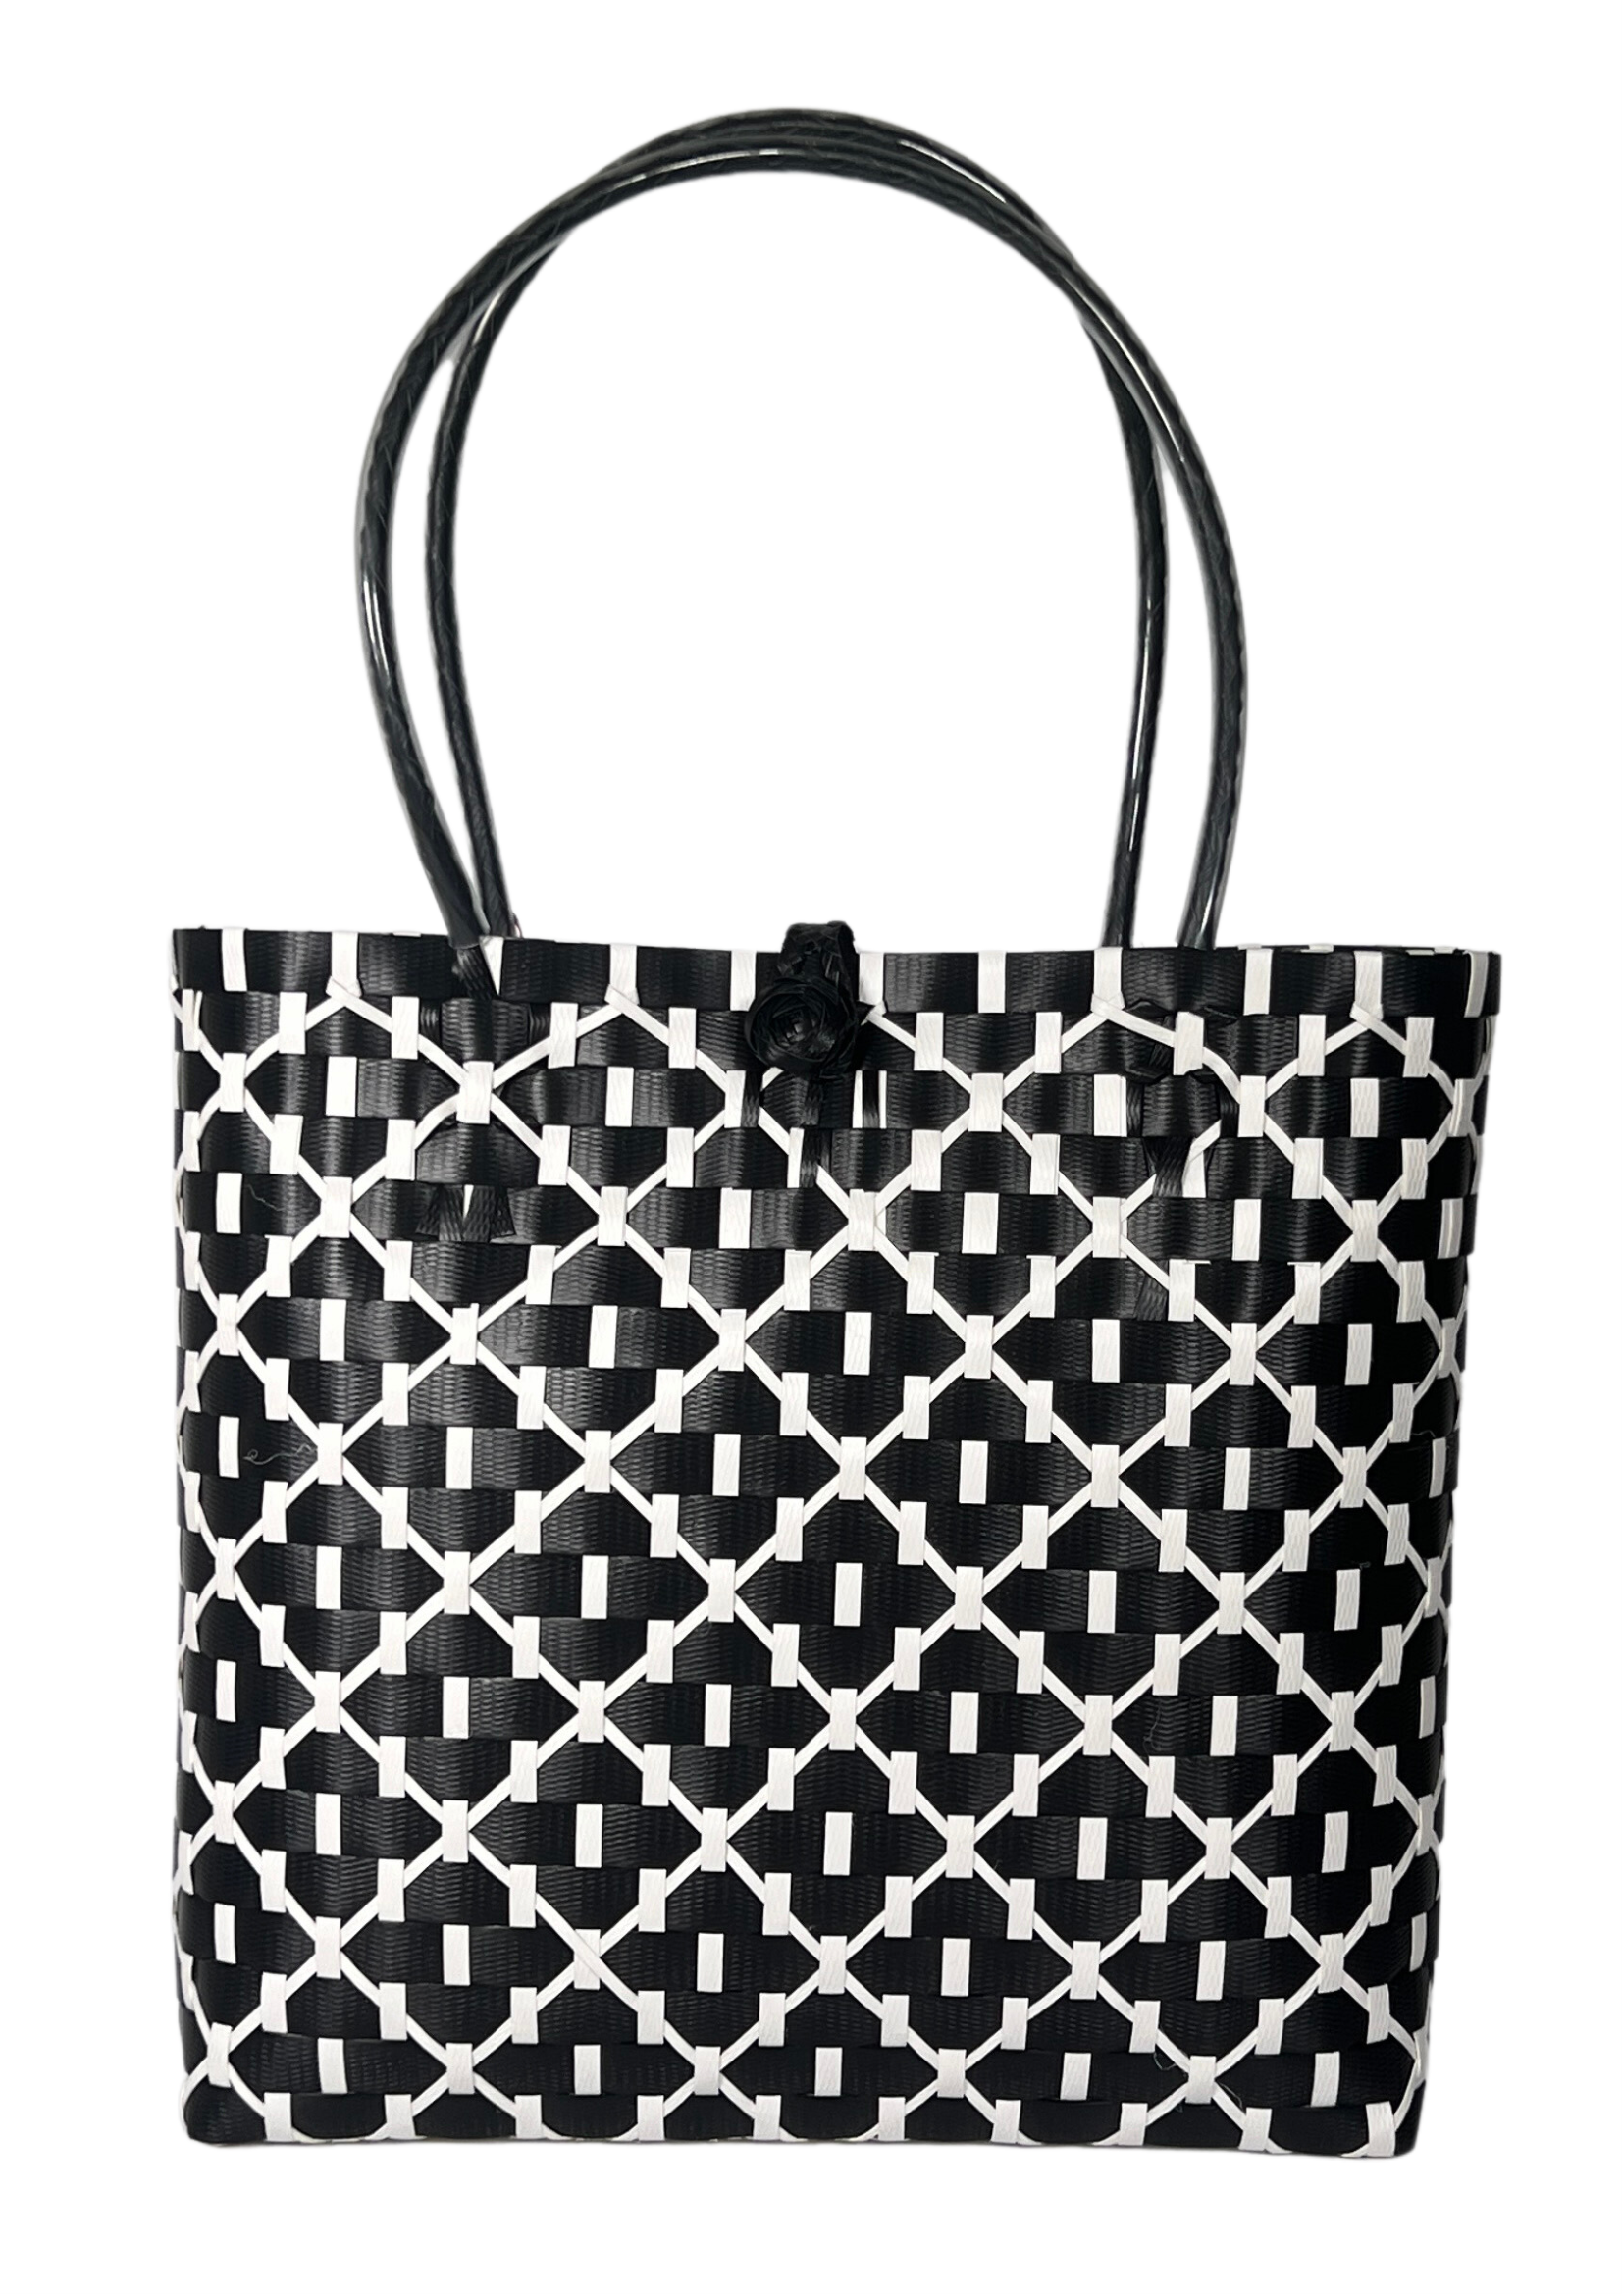 Chanel Black and White Patterned Bag